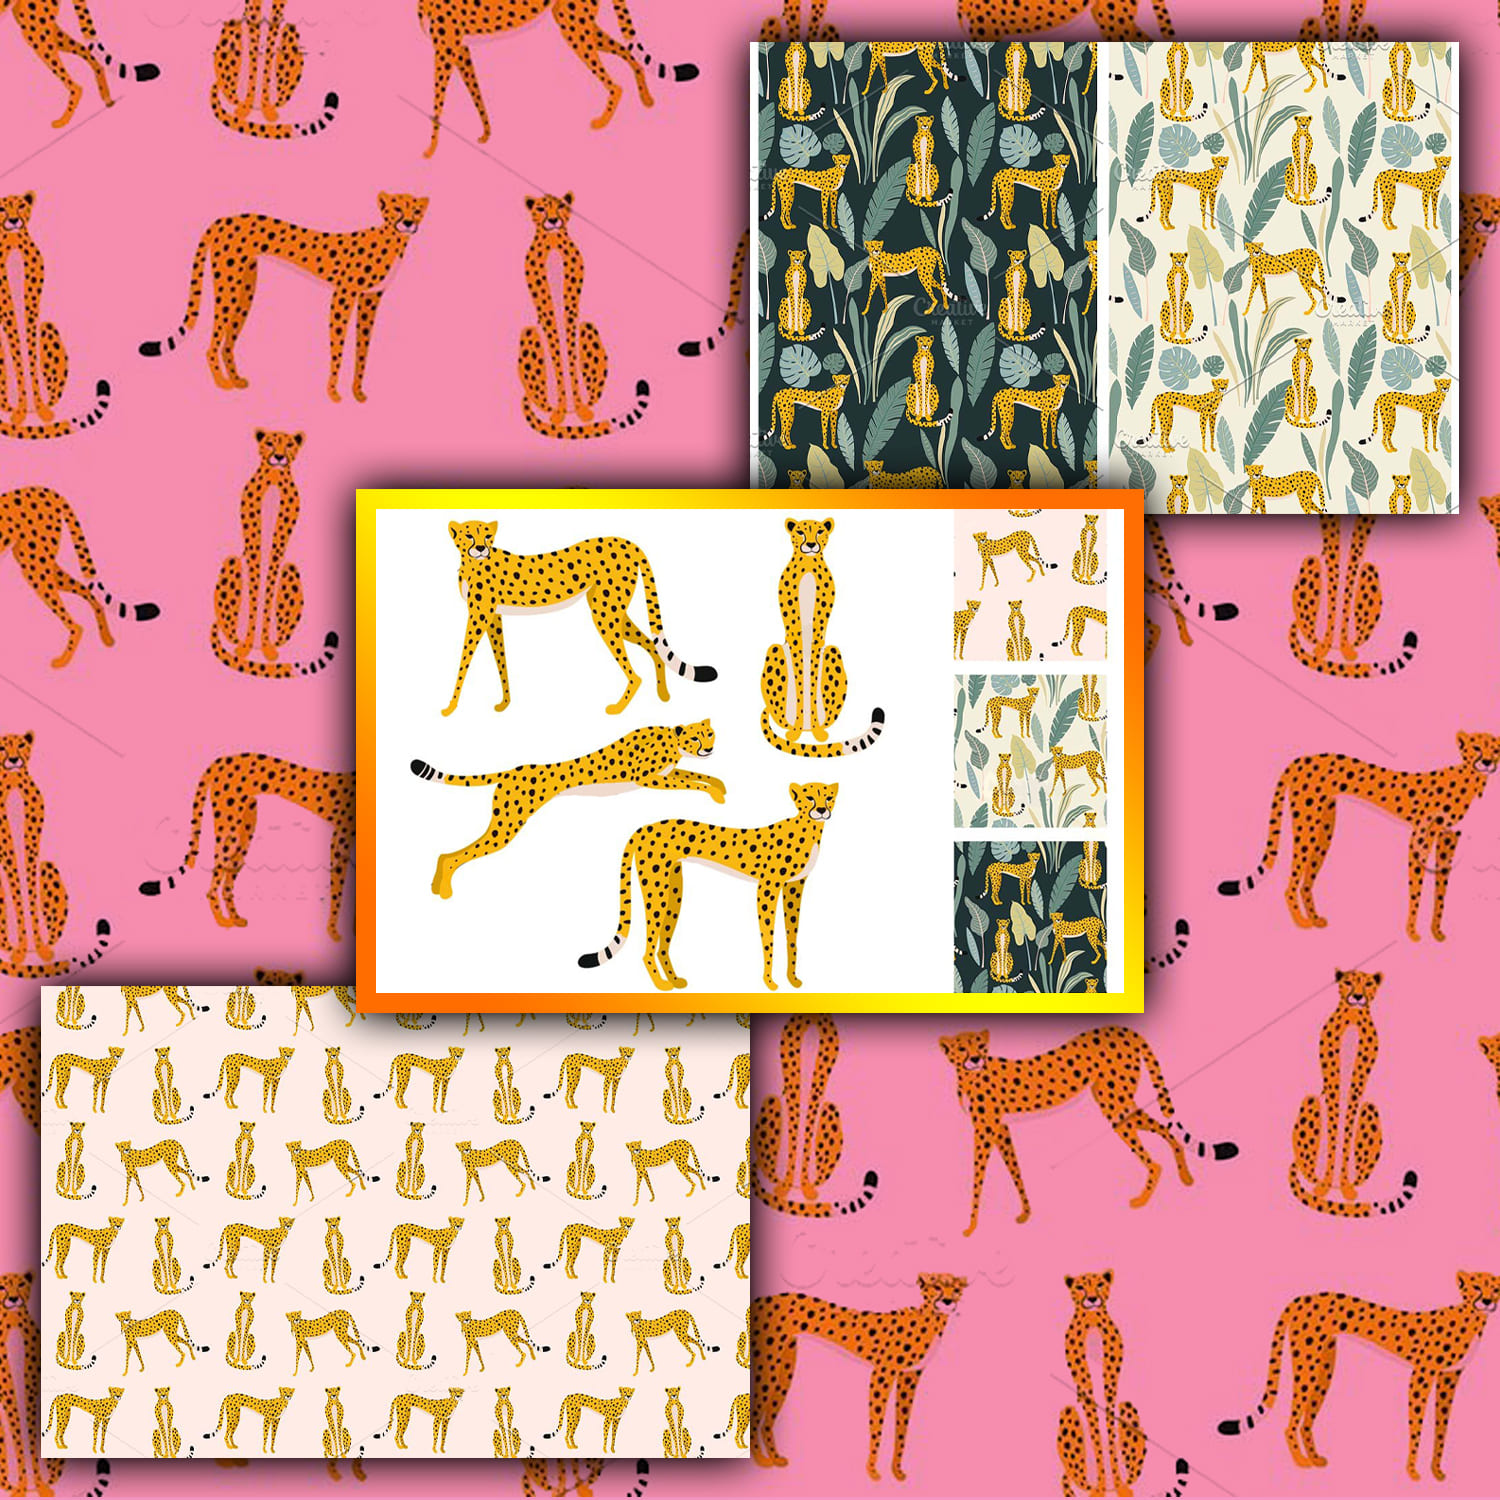 Collection Of Leopards And Patterns Cover.